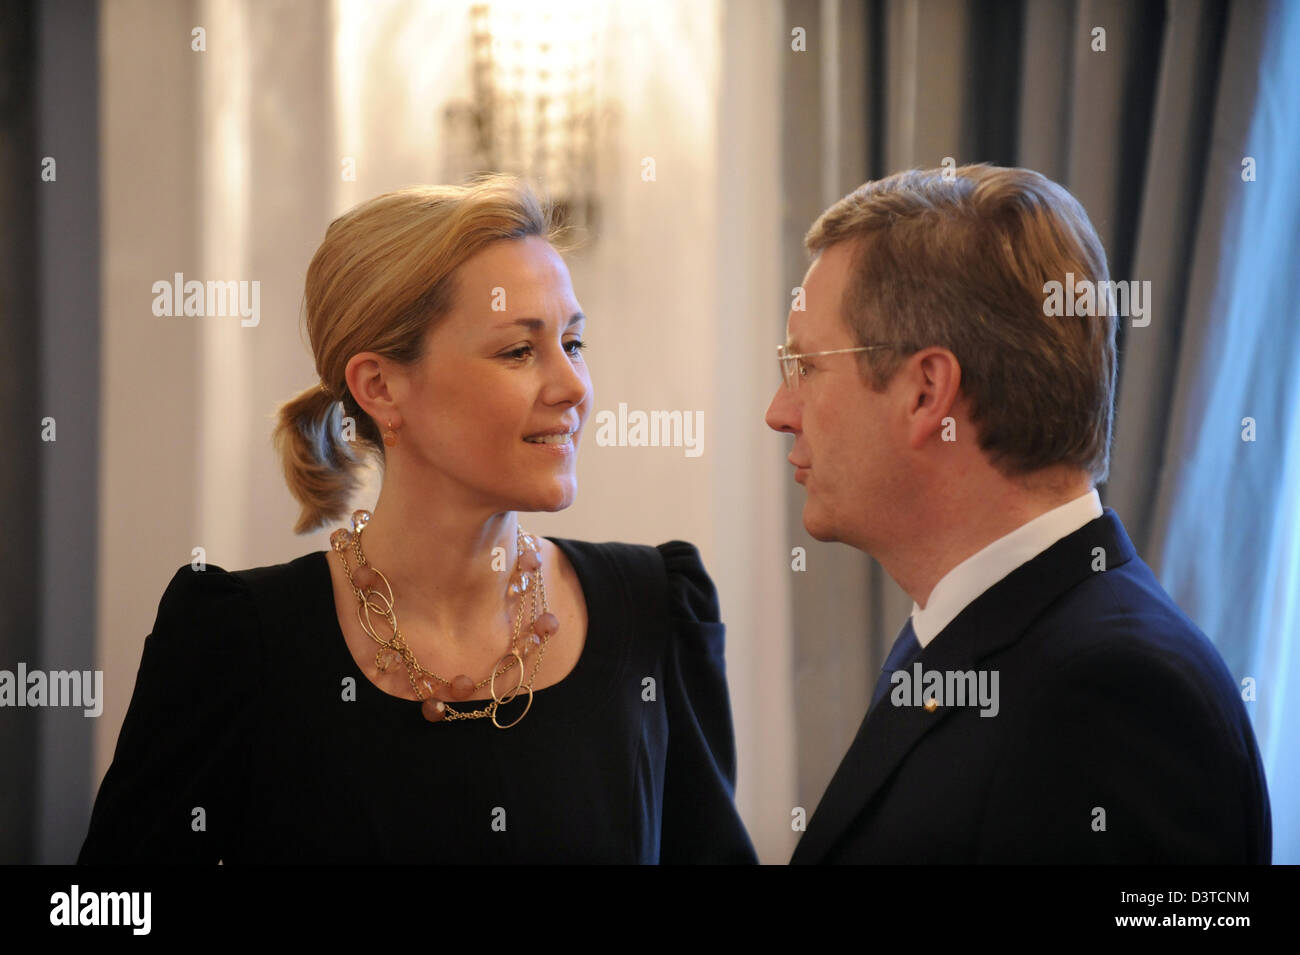 Berlin, Germany, Christian Wulff, CDU, and his wife Bettina Wulff during the New Year Reception Stock Photo